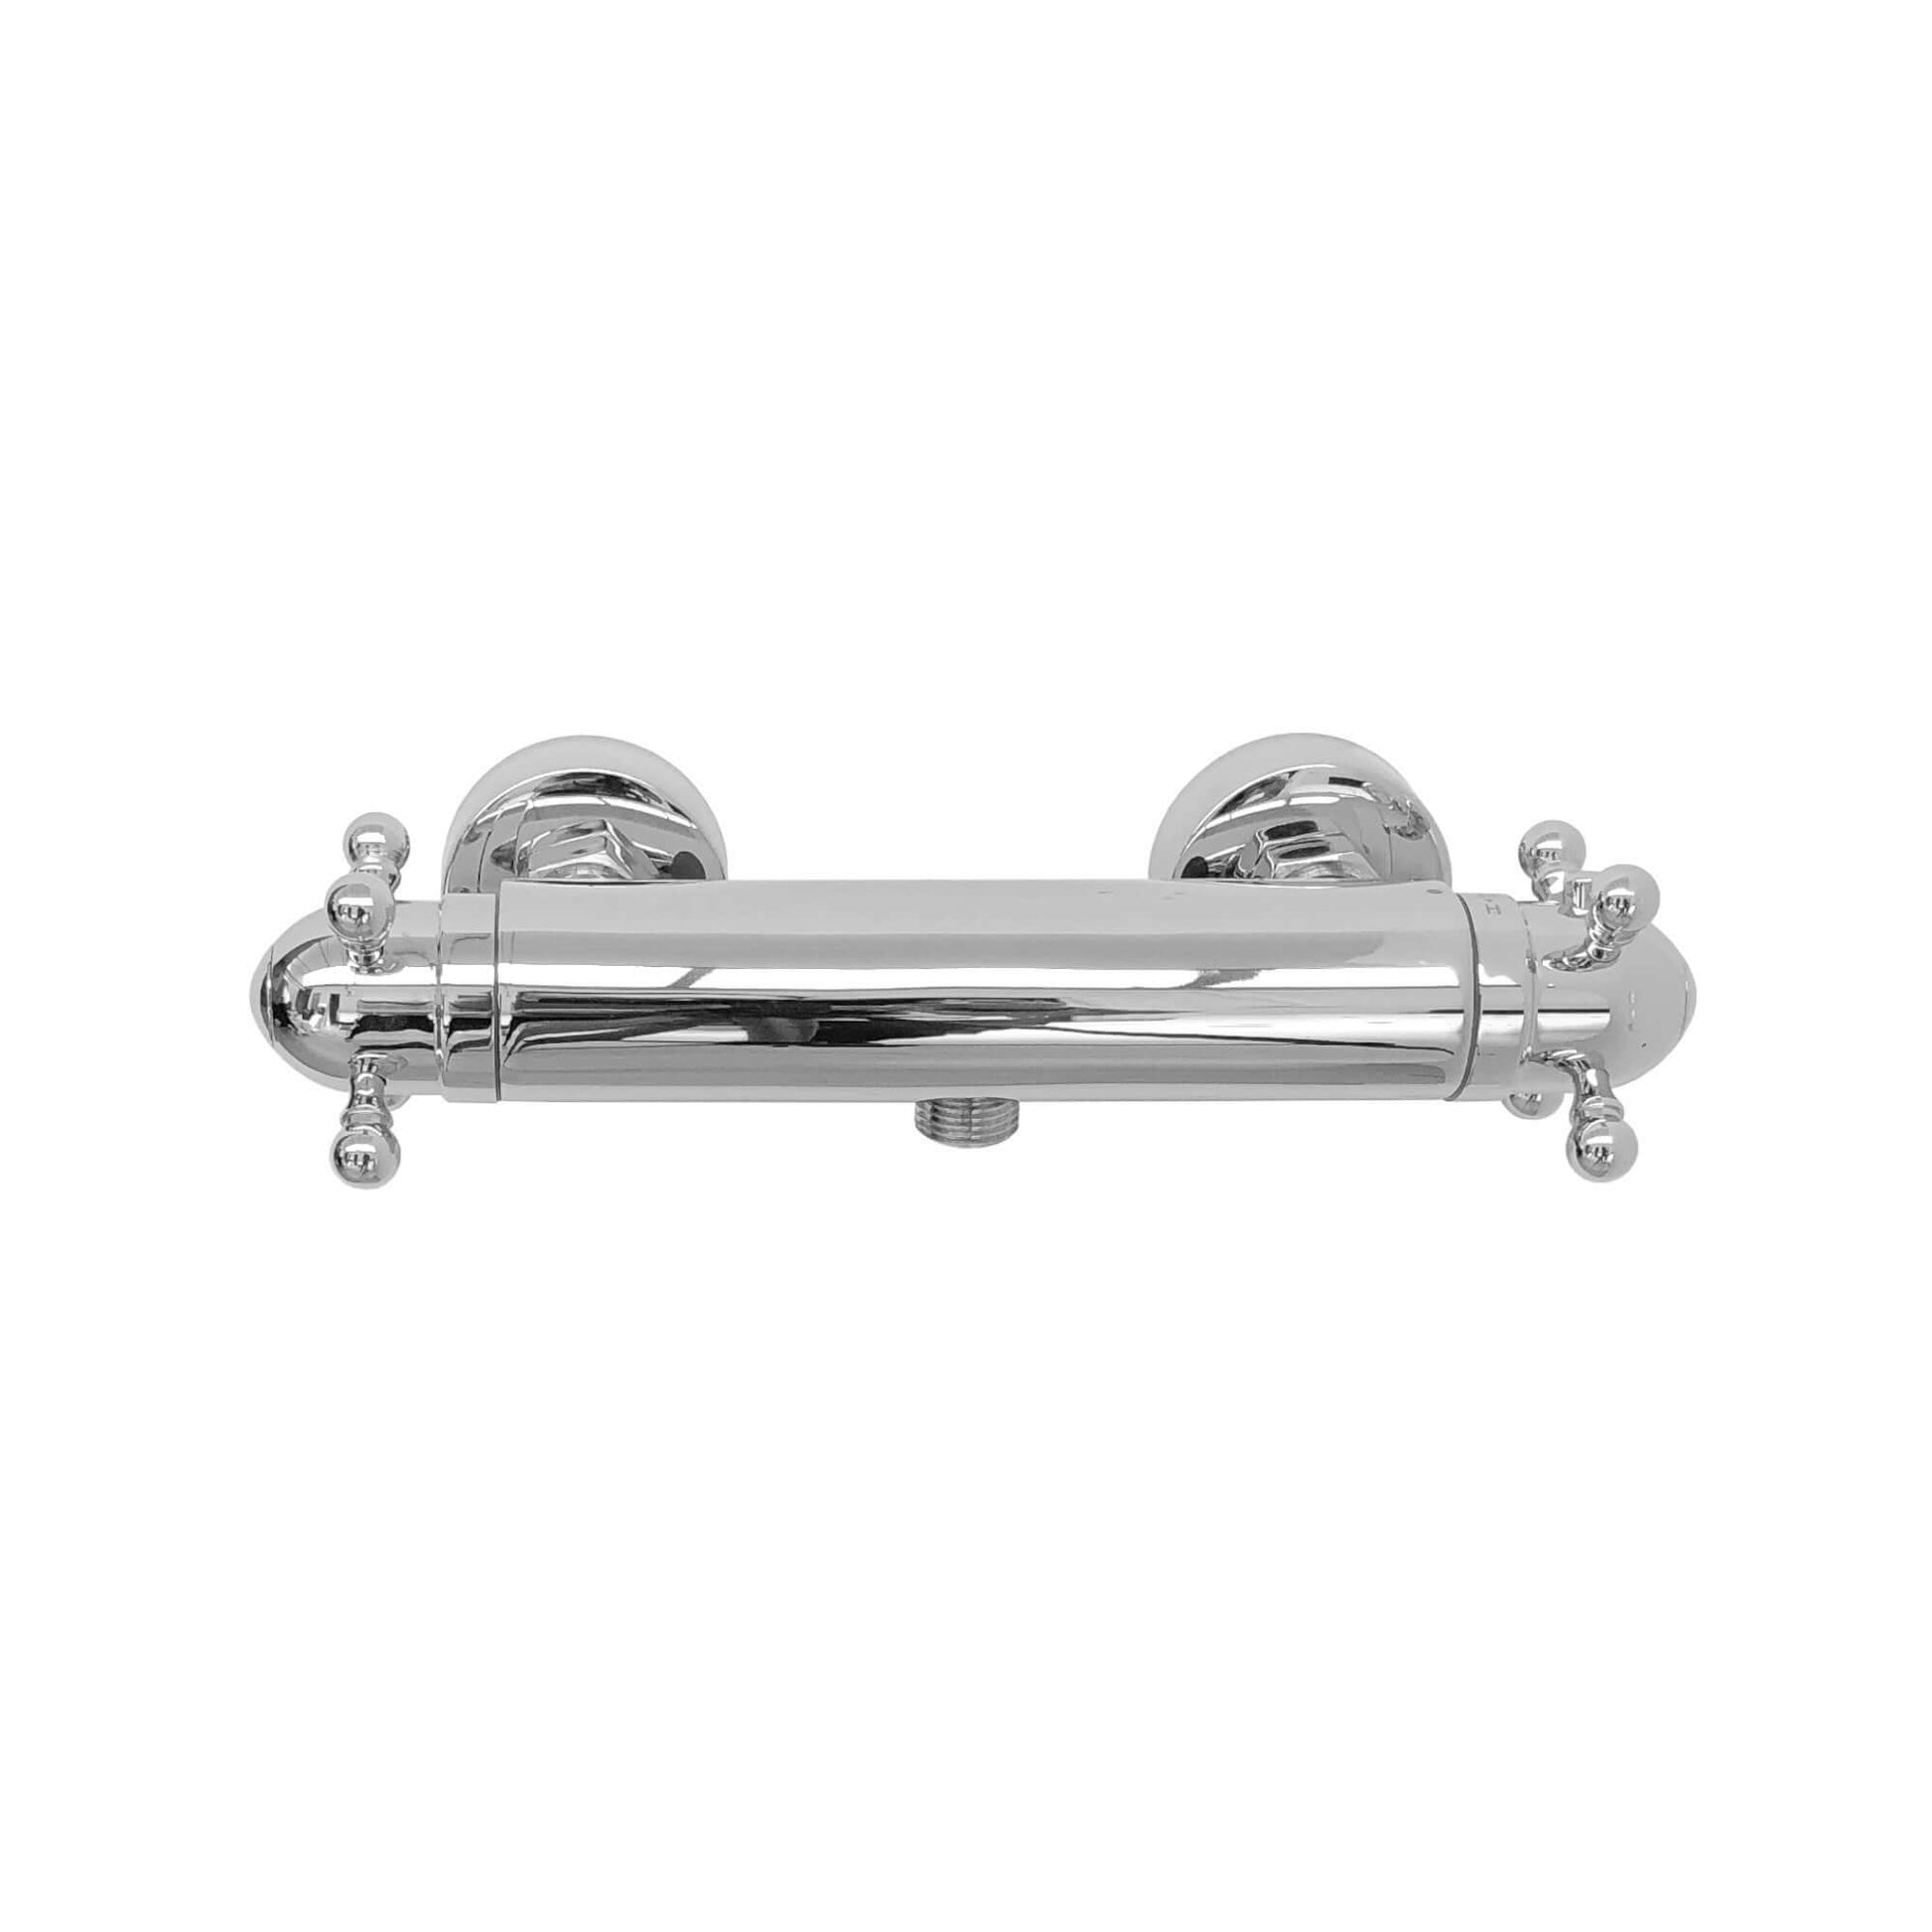 Gallant traditional thermostatic shower bar mixer valve with slider rail shower kit - chrome - Showers